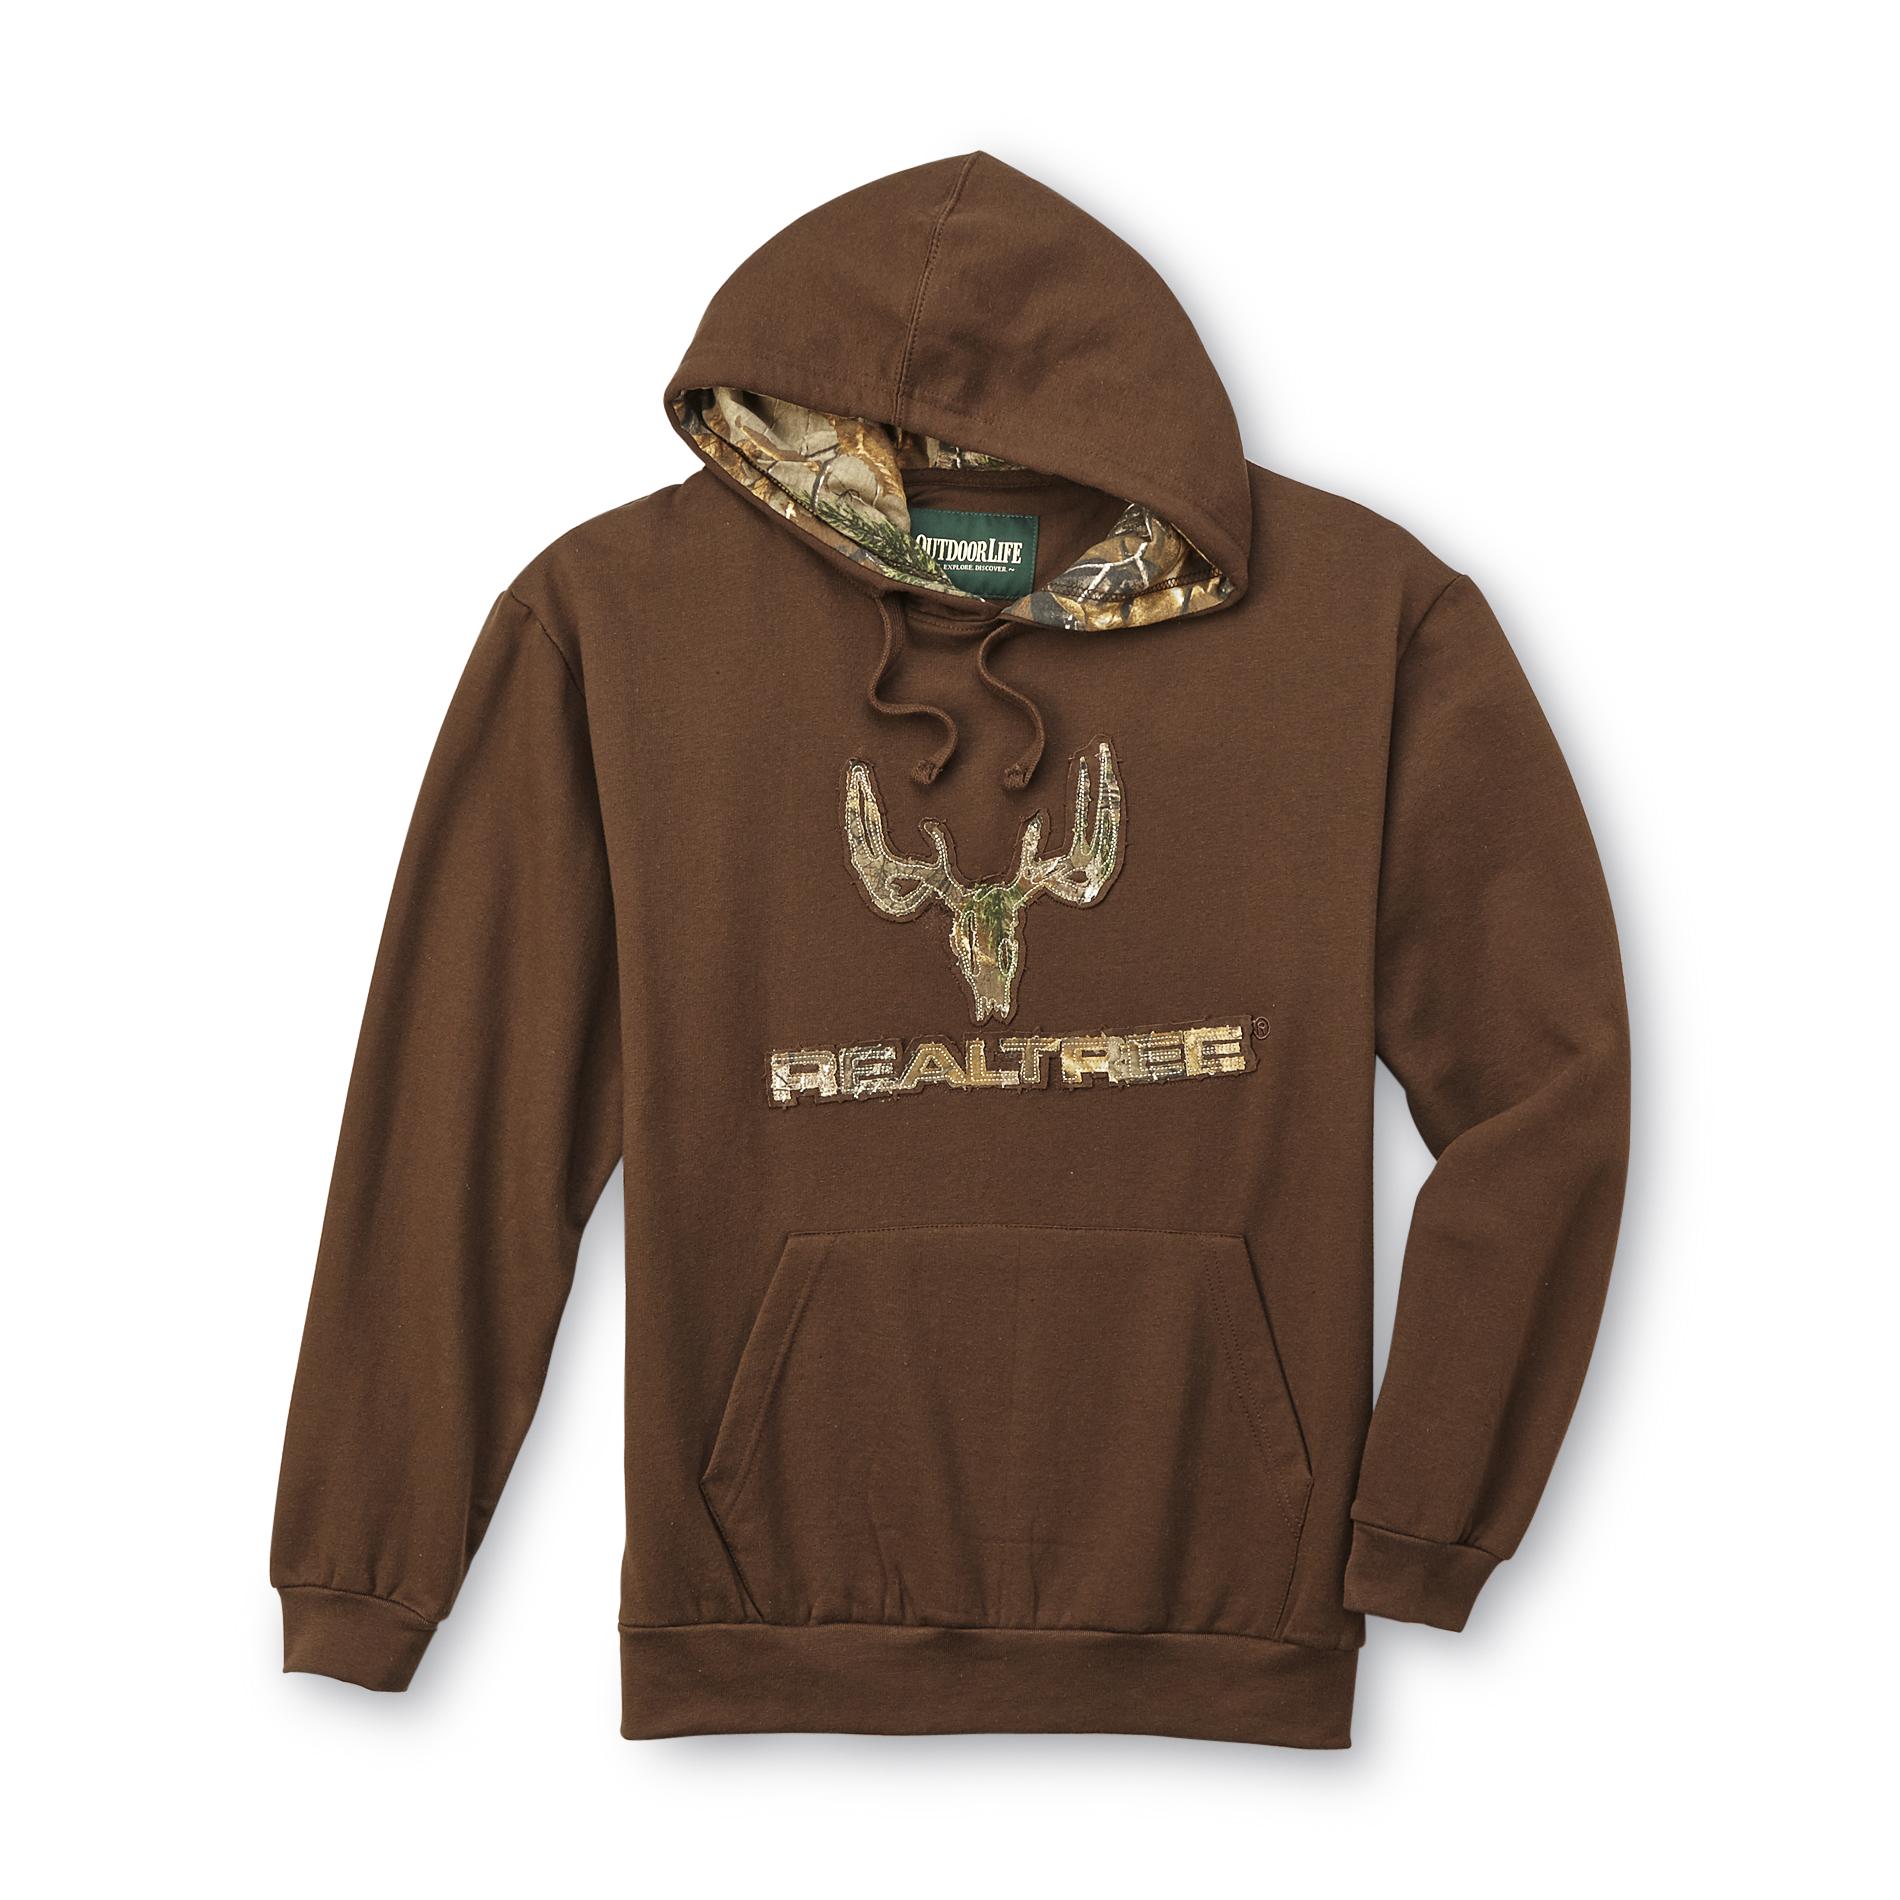 Outdoor Life Men's Realtree Hoodie - Embroidered Camo